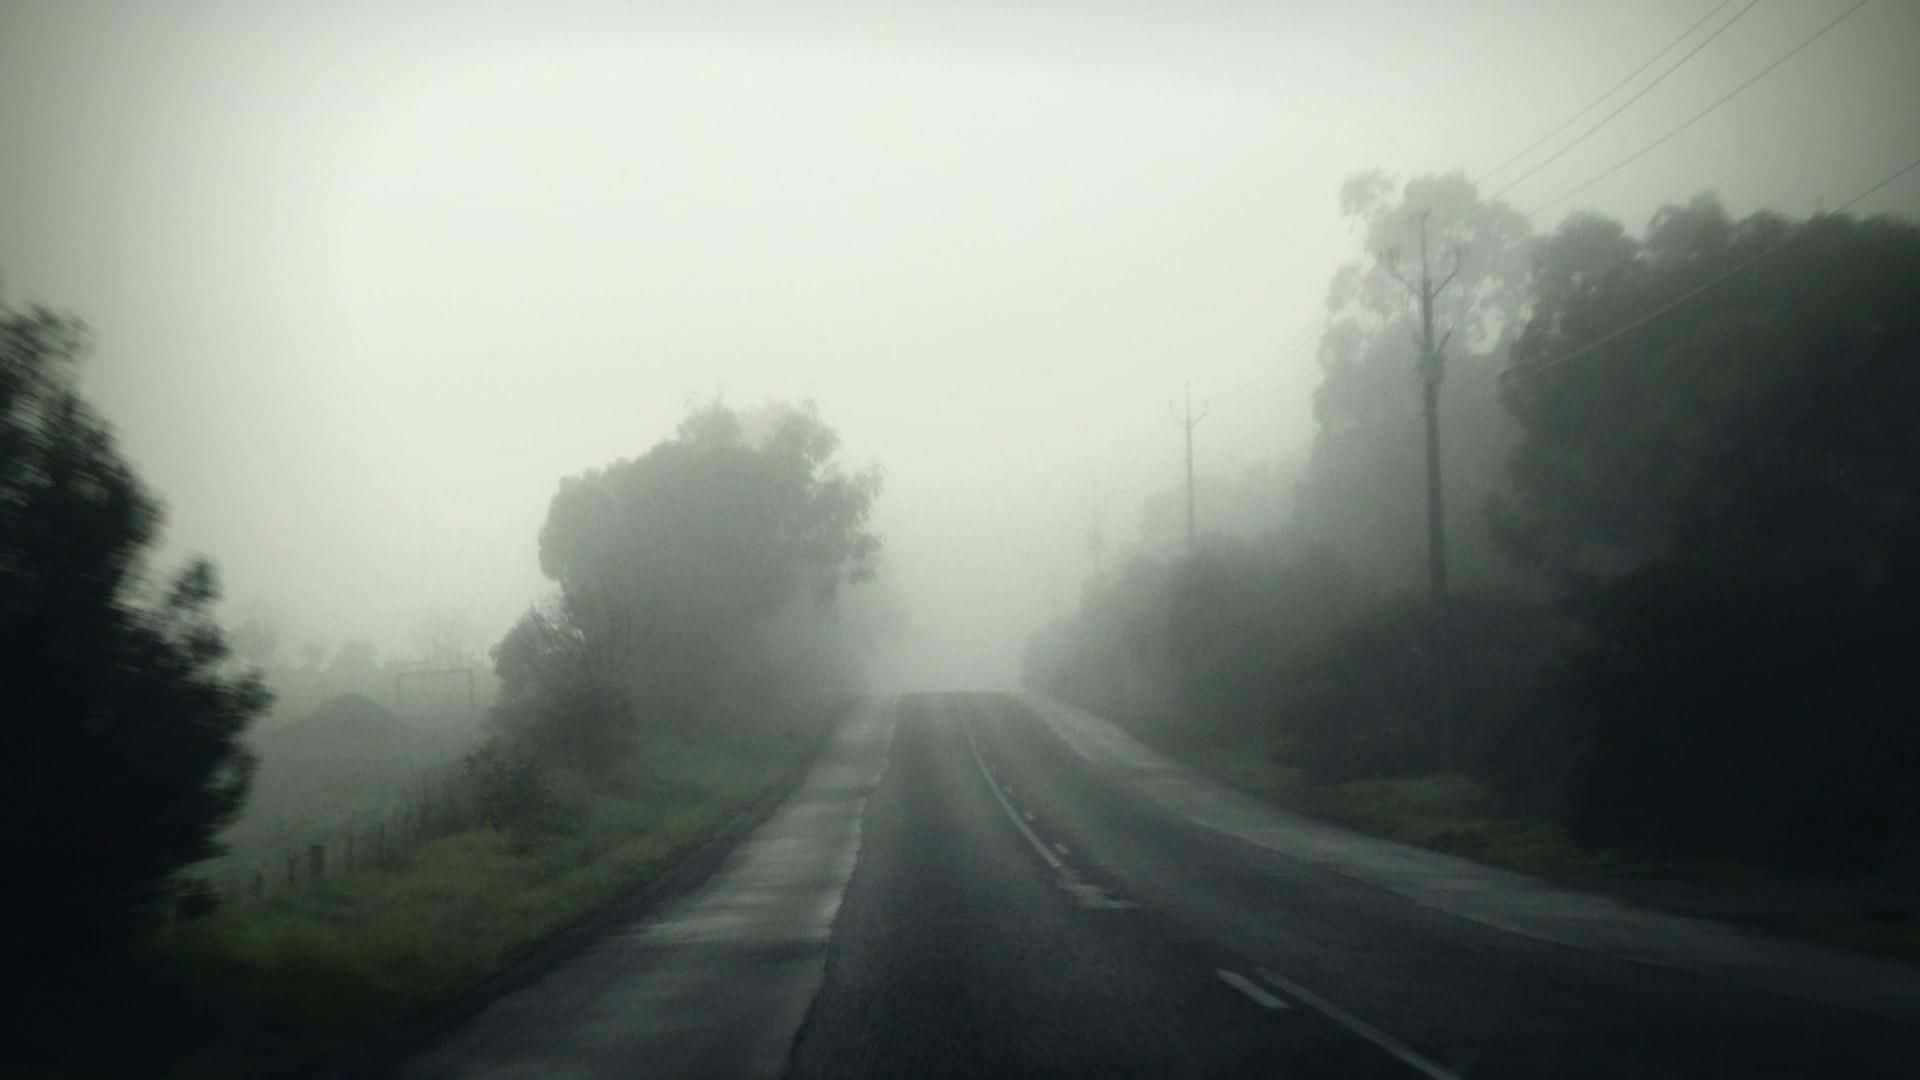 An eerie view of the town of Silent Hill